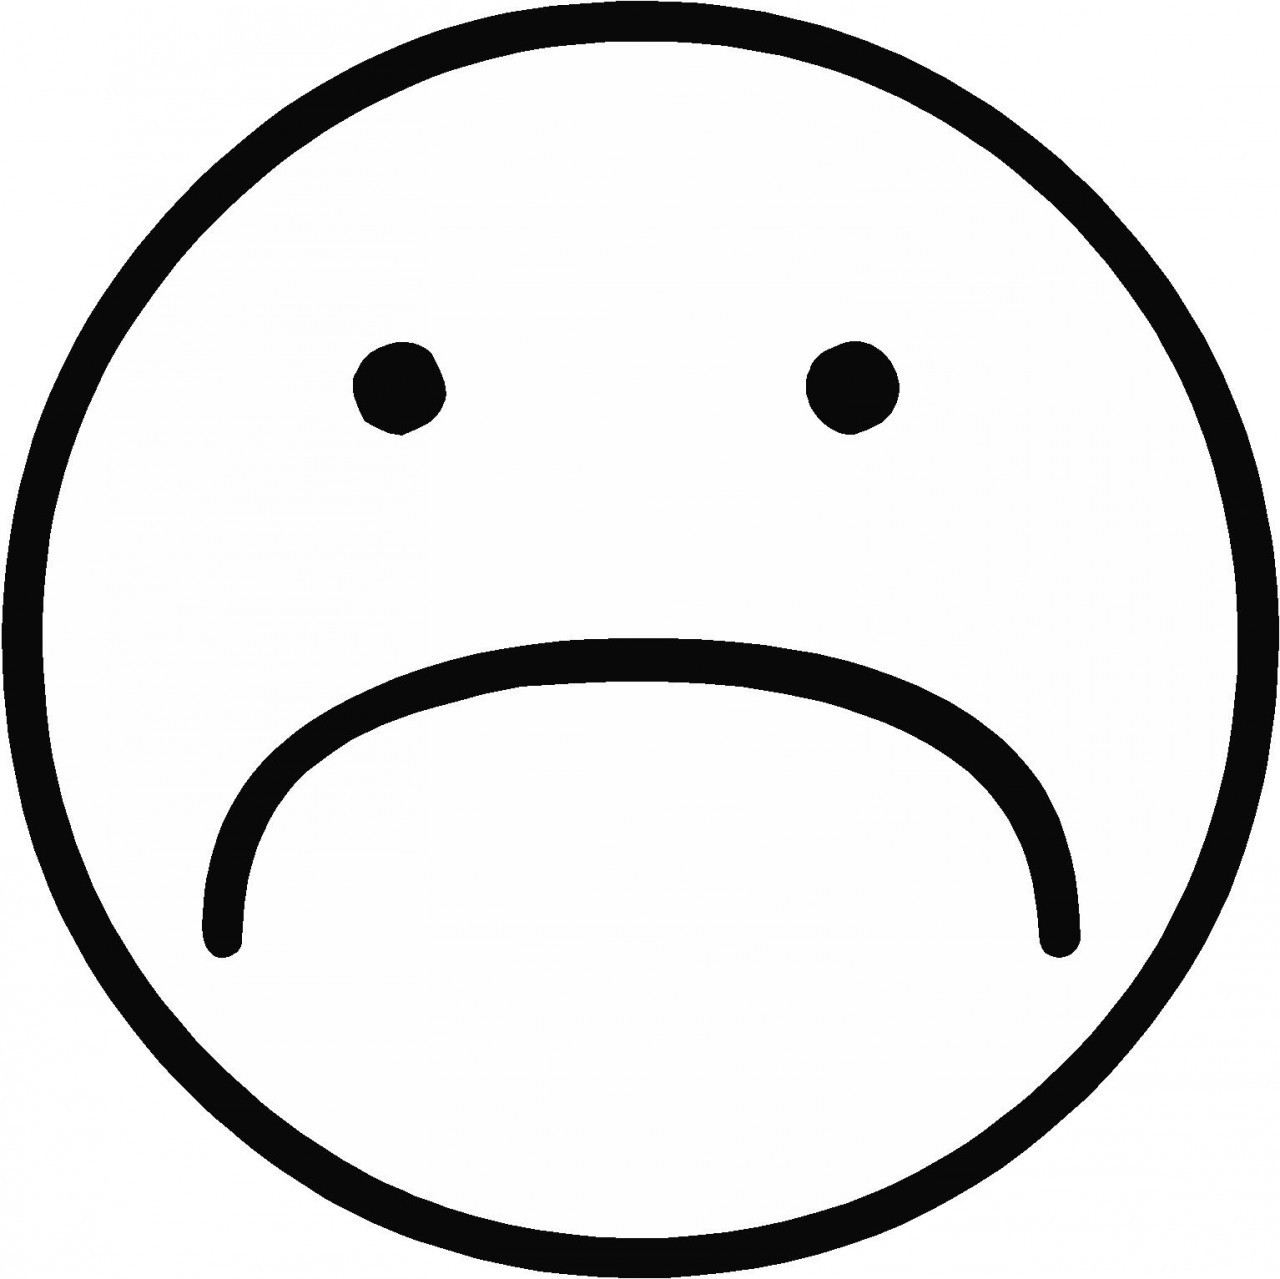 Sad Face Coloring Page Images & Pictures - Becuo